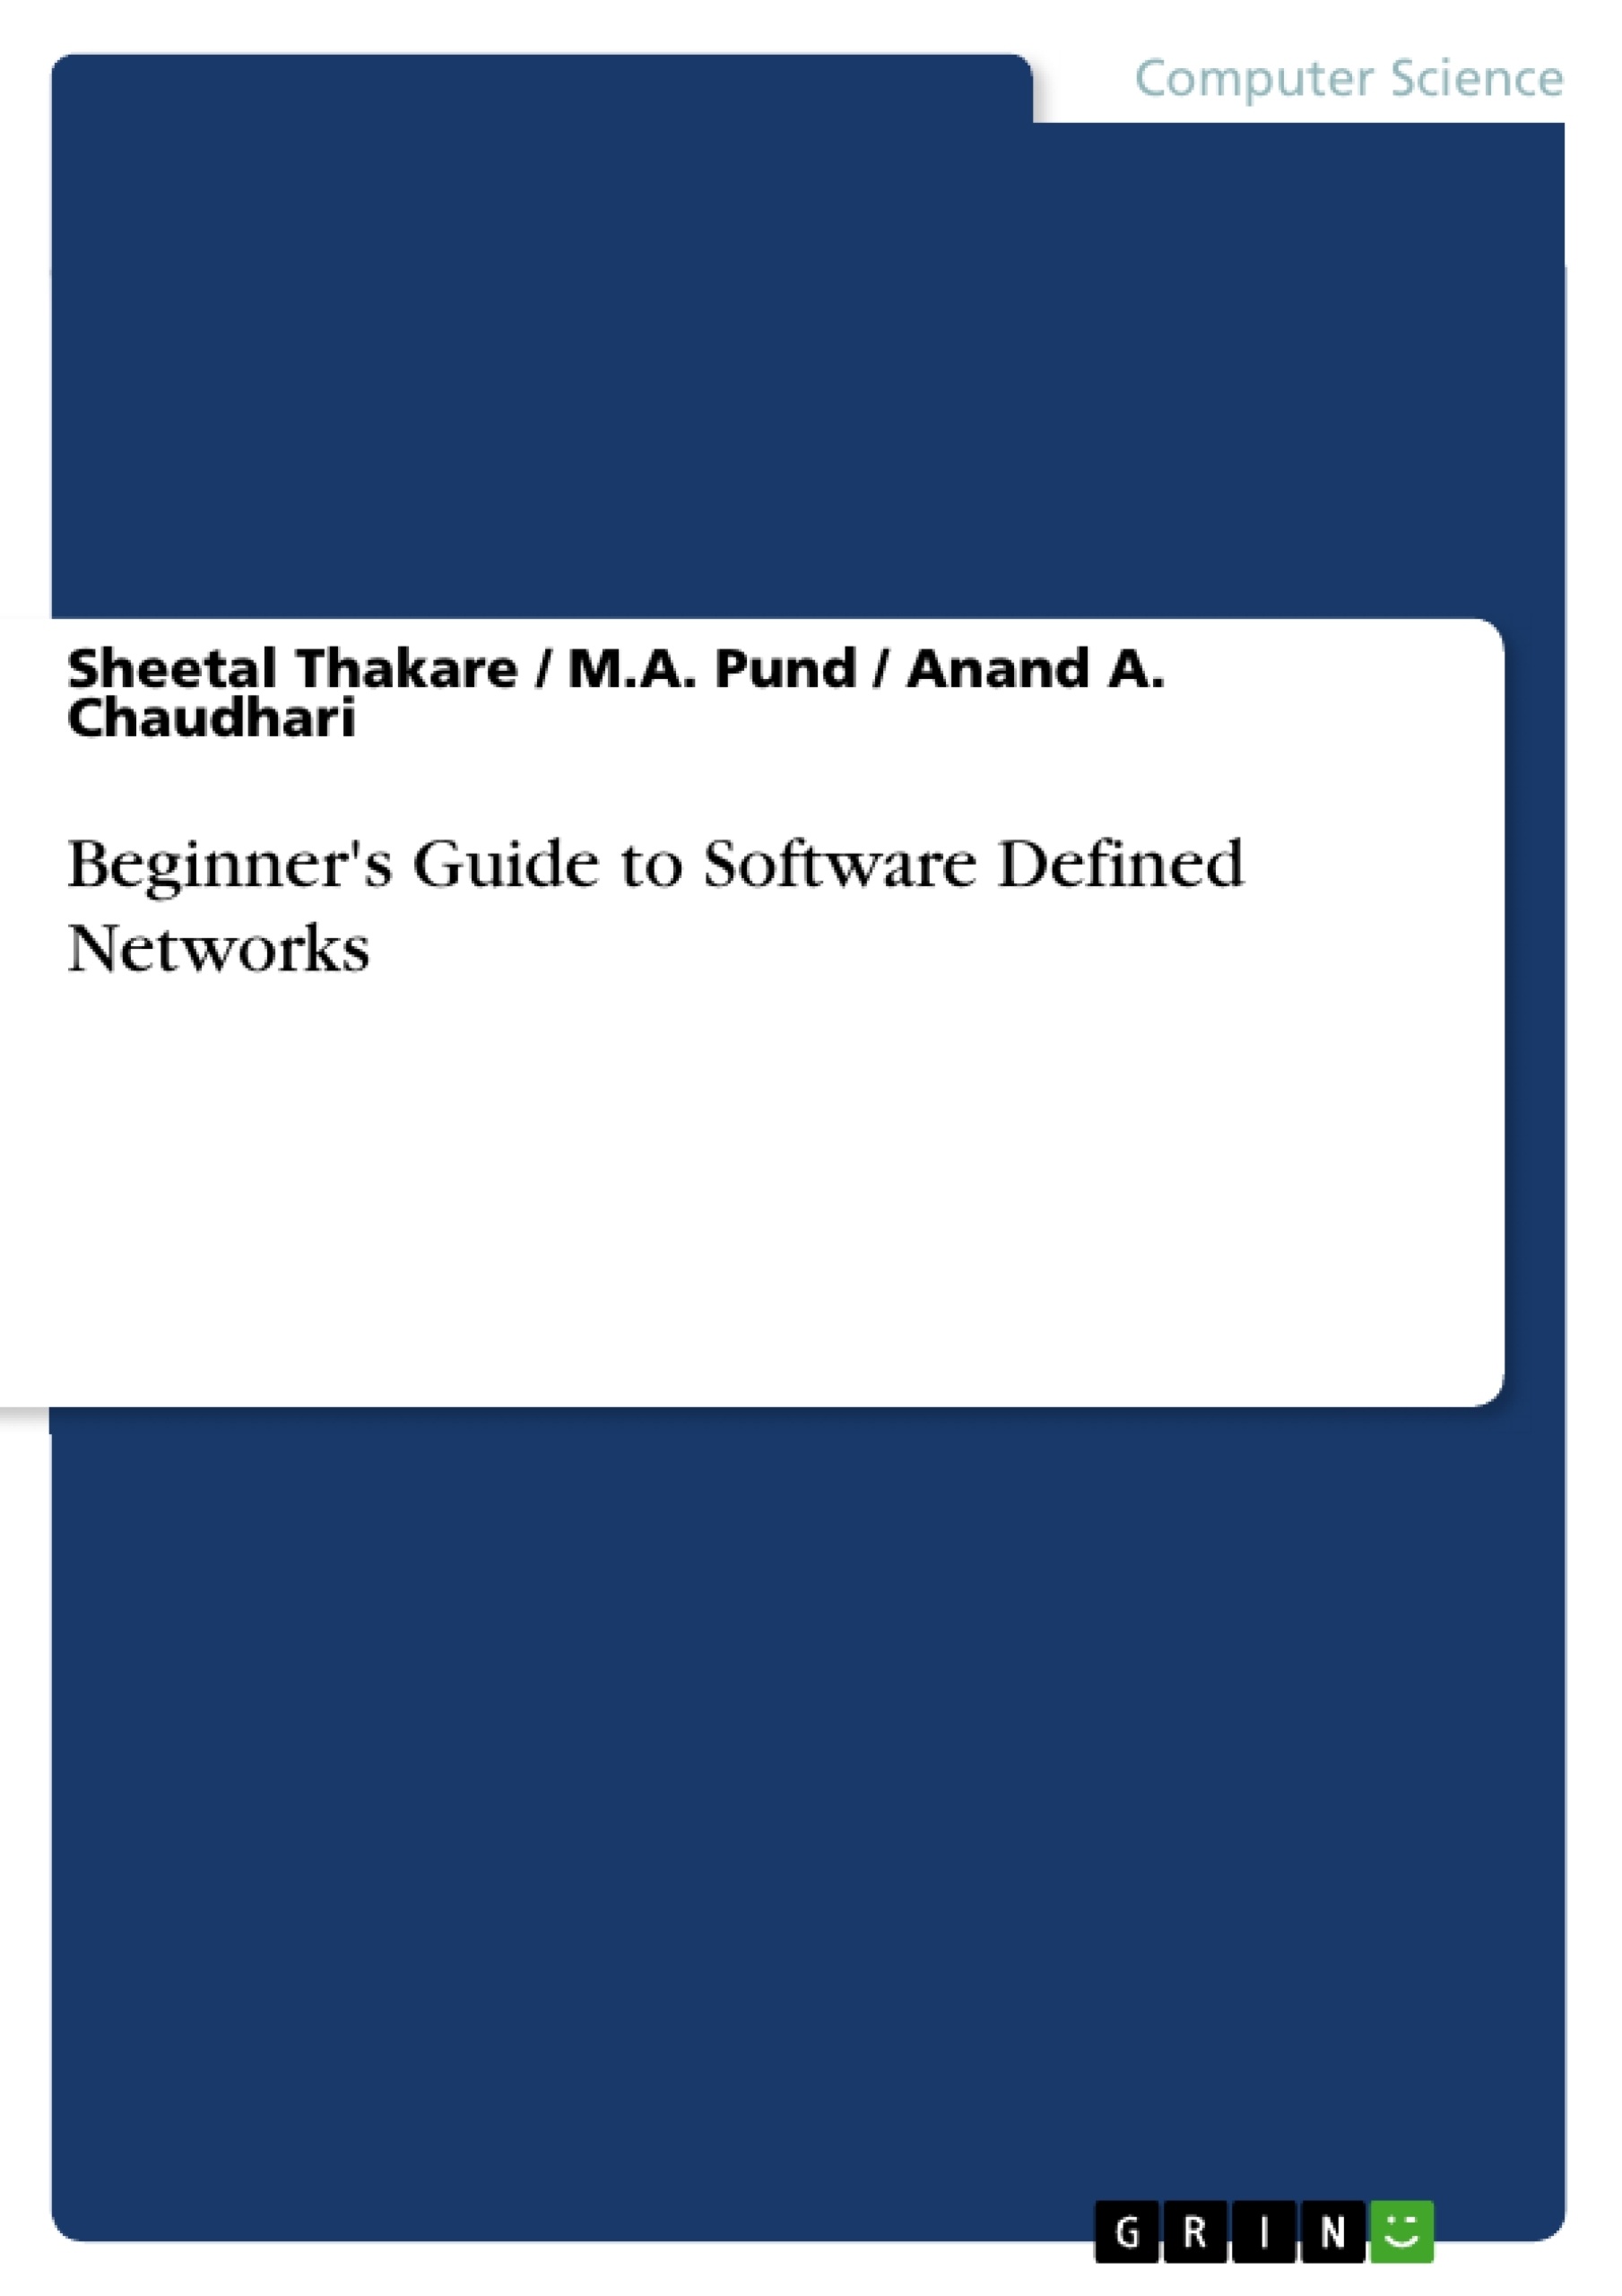 Título: Beginner's Guide to Software Defined Networks